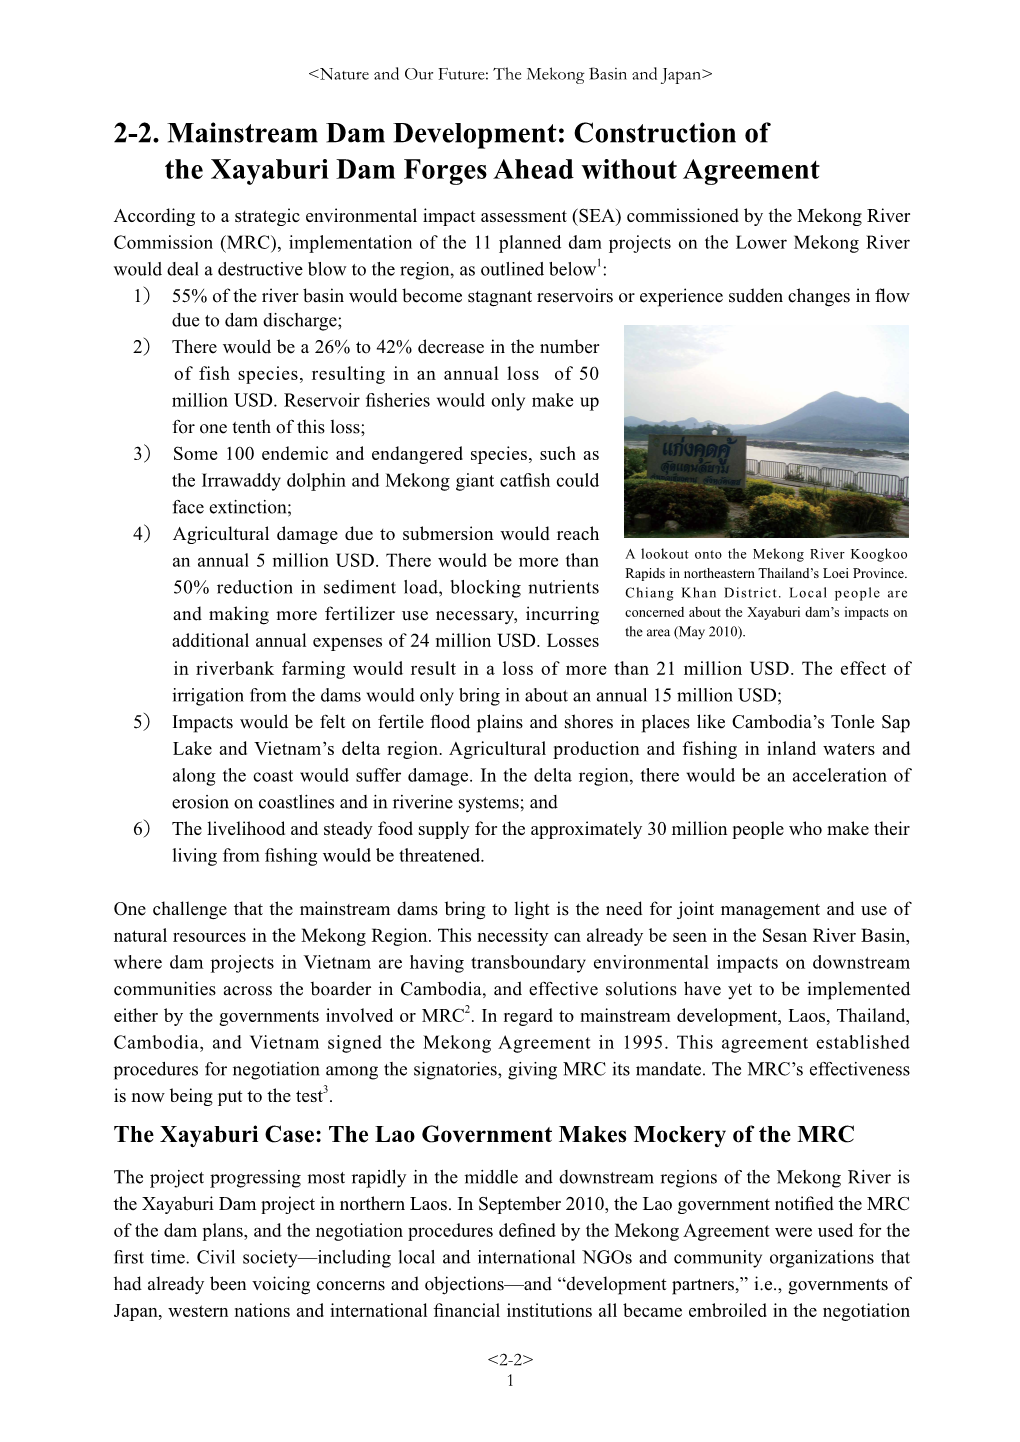 2-2. Mainstream Dam Development: Construction of the Xayaburi Dam Forges Ahead Without Agreement